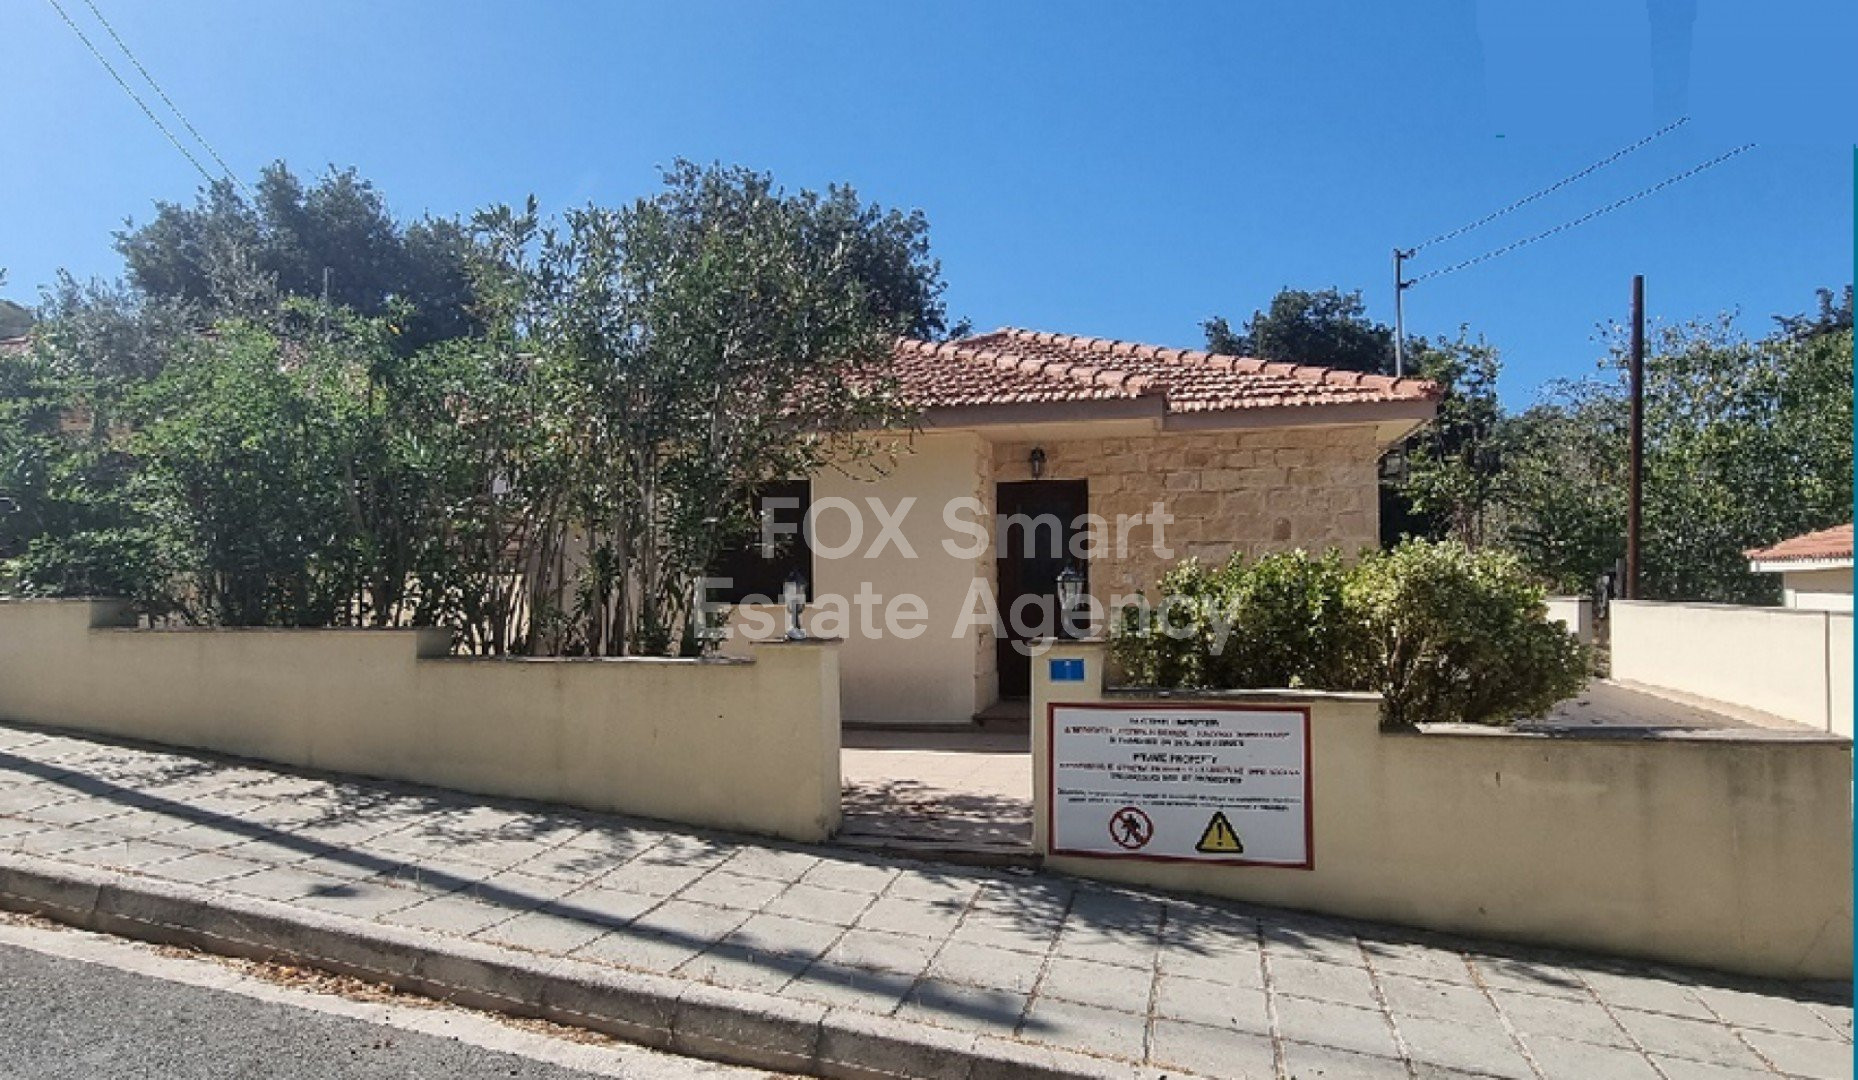 House, For Sale, Paphos, Lysos  3 Bedrooms 1 Bathroom 311.00.....